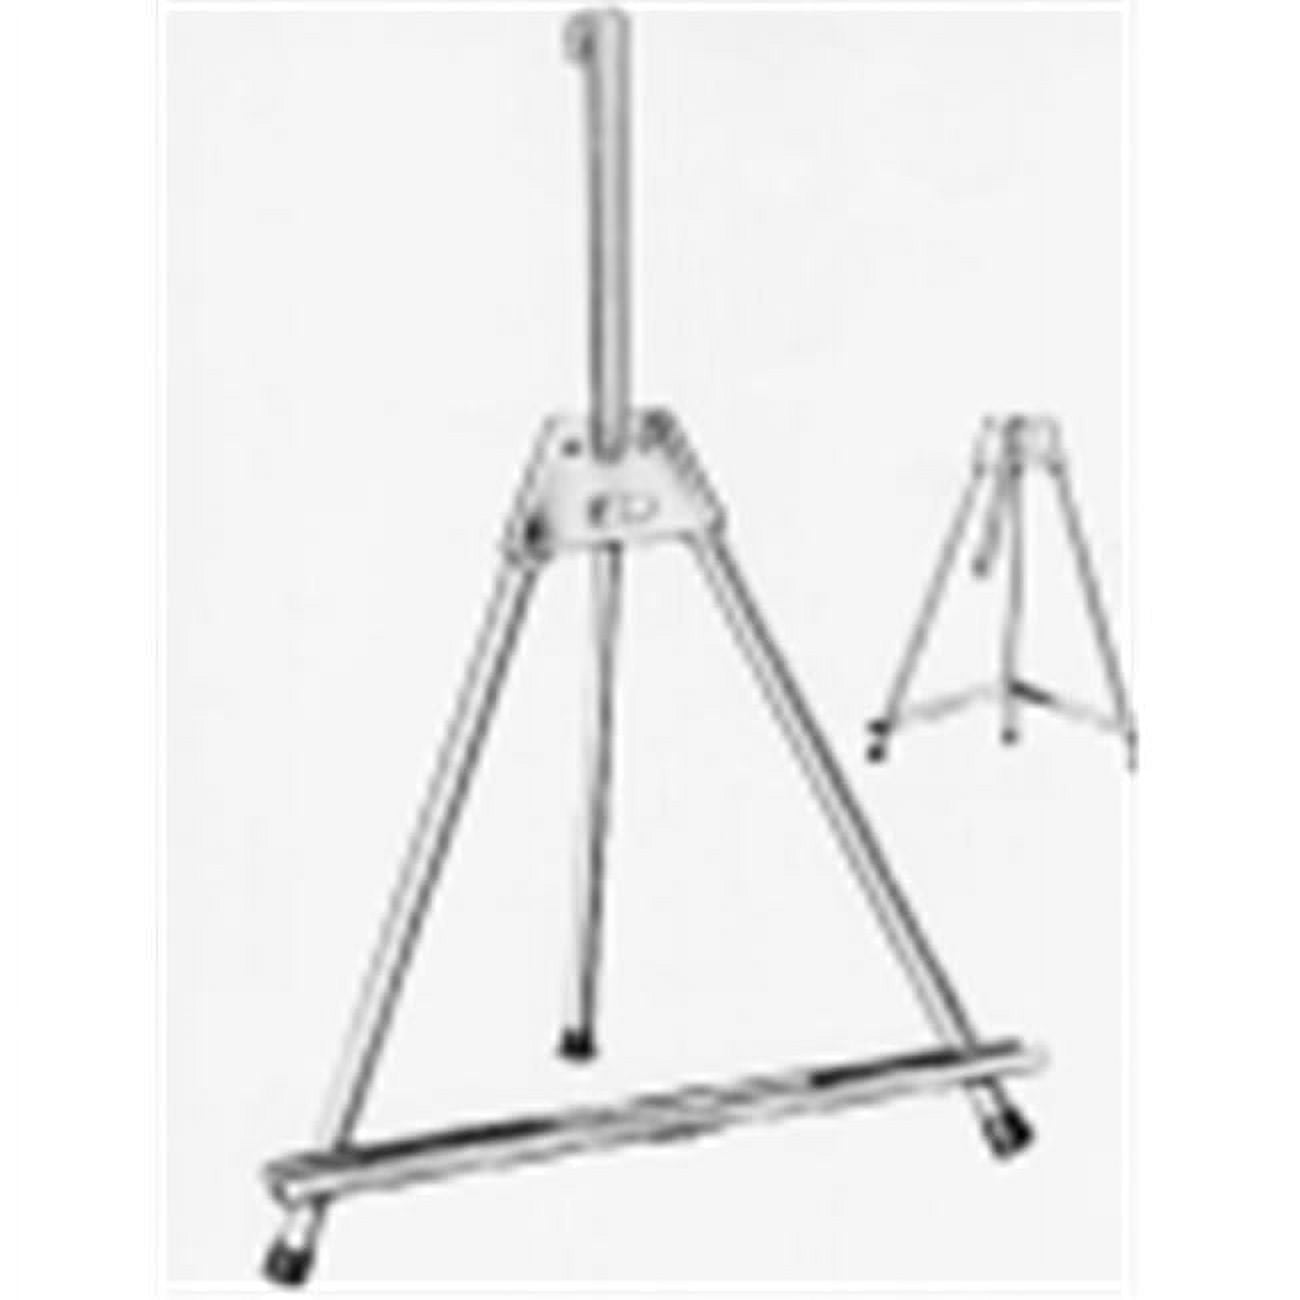 MEEDEN Tabletop Easel for Painting, Wood H-Frame Table Easel, Table Top  Painting Easel for Adults, Beginners, Artists, Holds Canvas up to 23